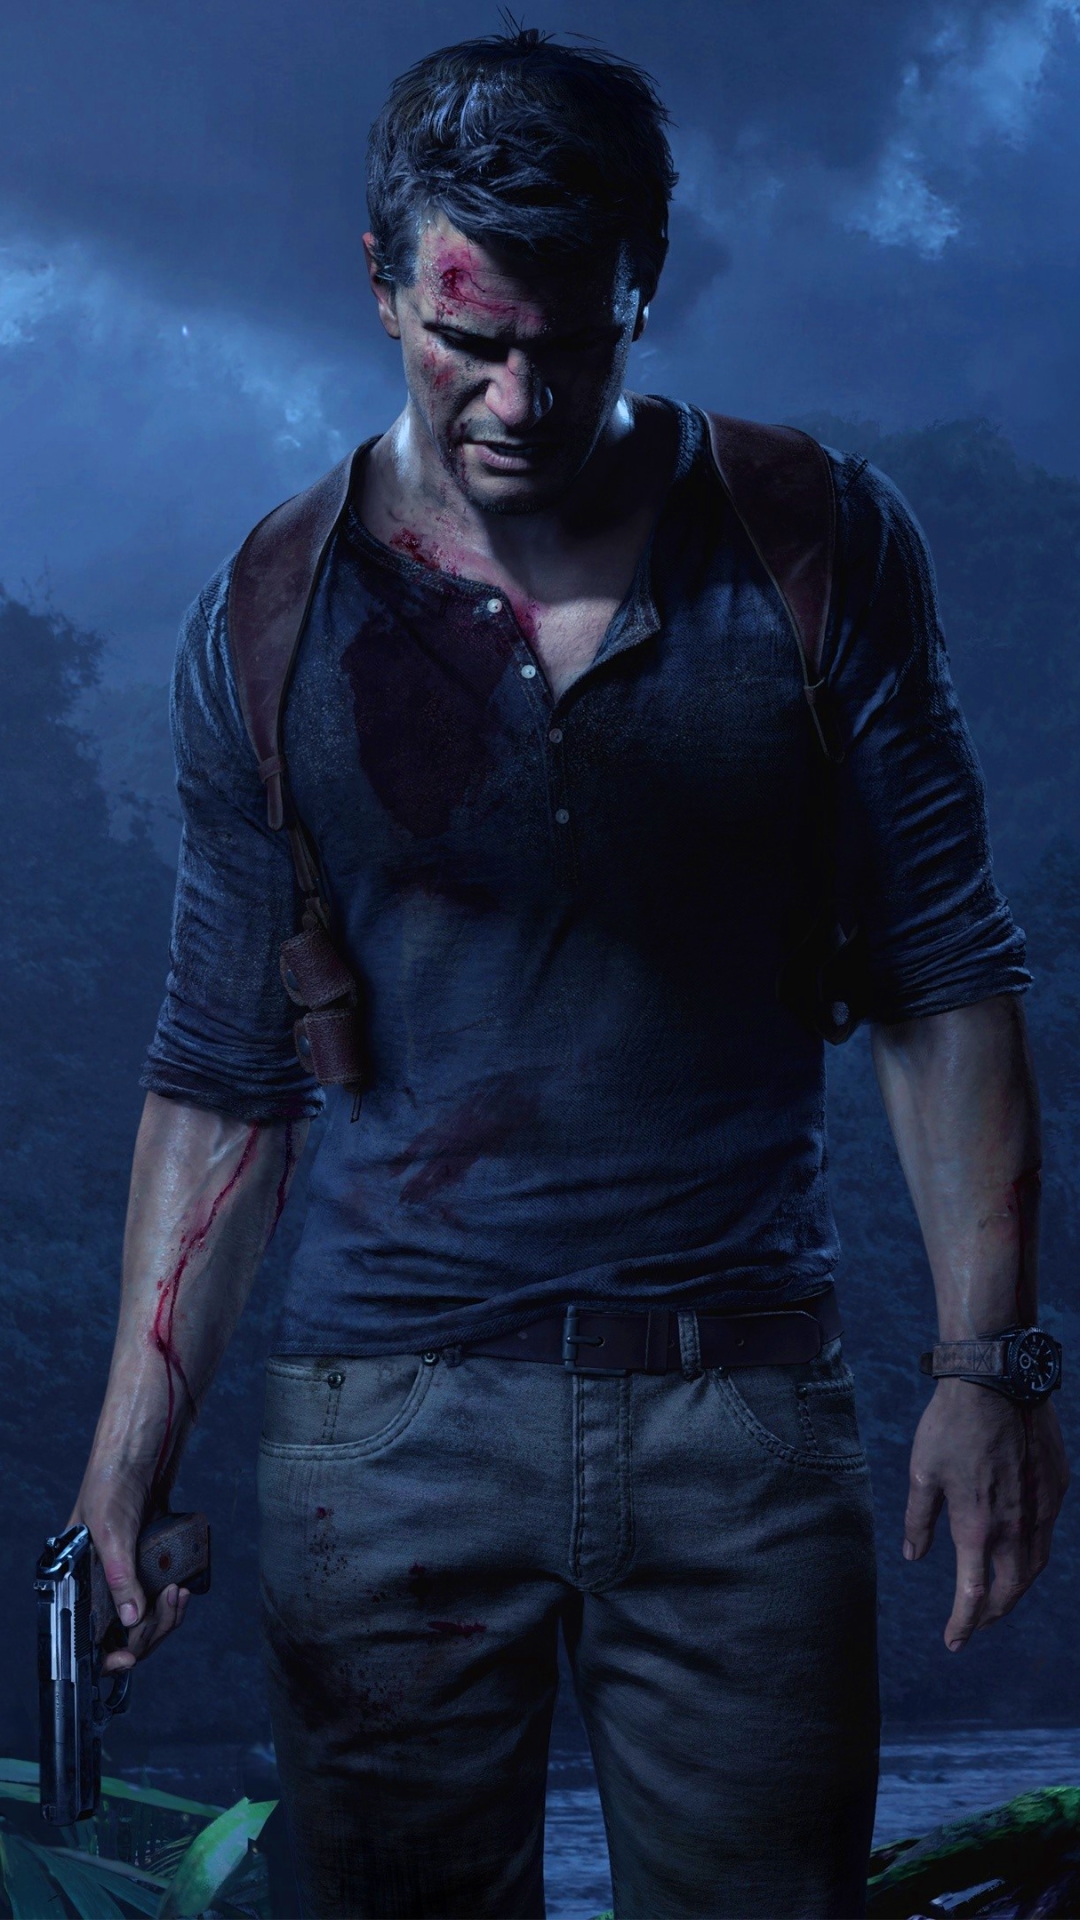 uncharted, uncharted 4: a thief's end, gun, video game, nathan drake Full HD